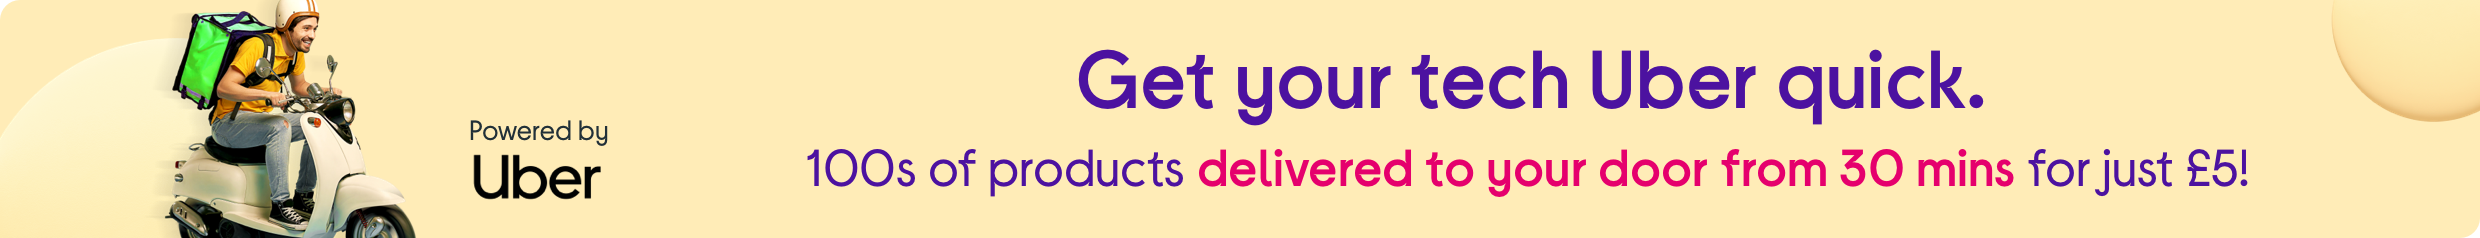 Get your tech Uber quick. 100s of products delivered to your front door from 30 mins for just £5!